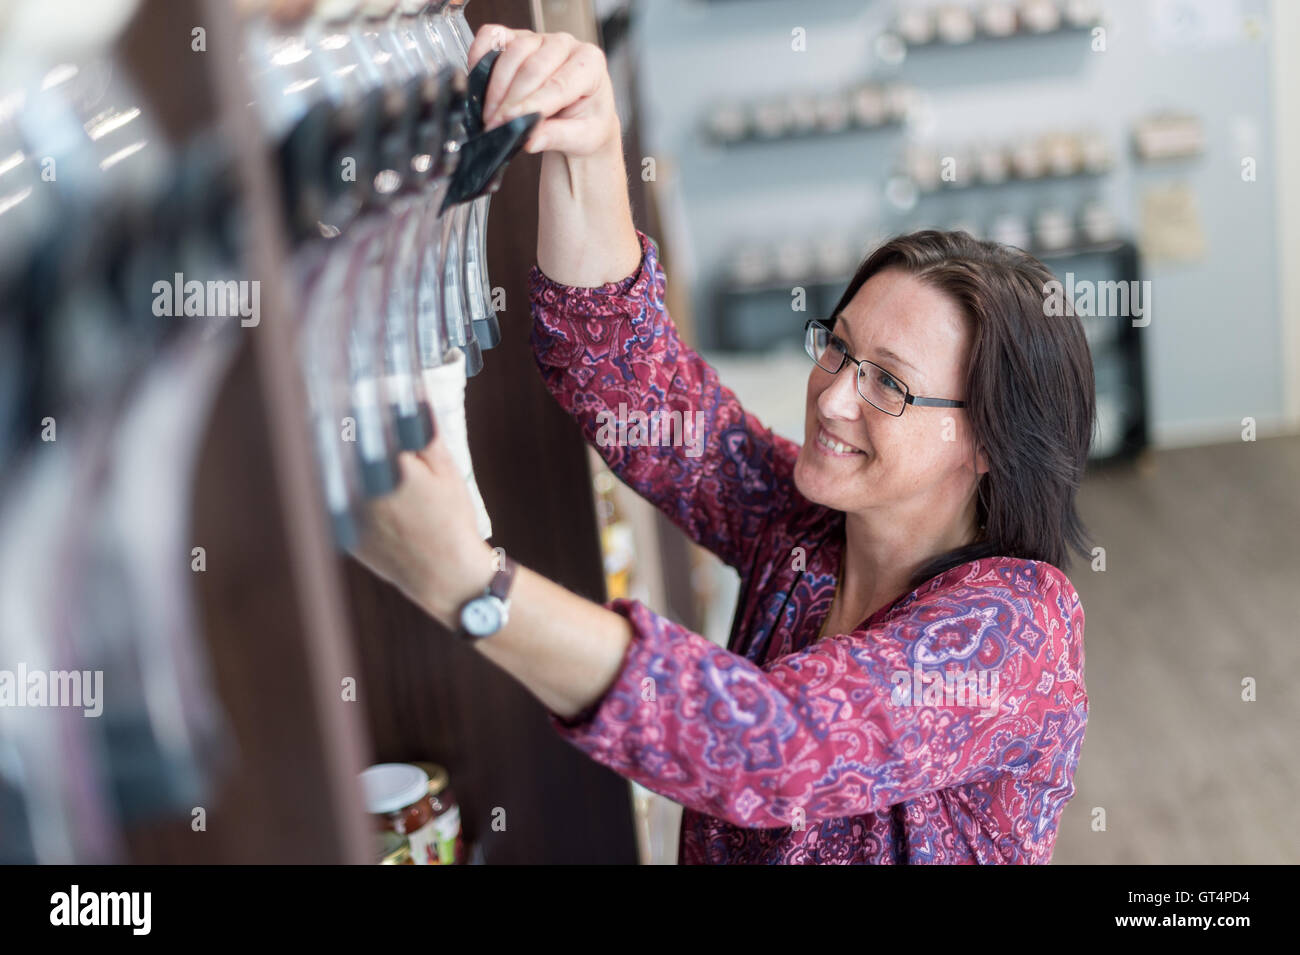 Hanover, Germany. 1st Sep, 2016. Owner Sandra Michel filling beans into a bag at the store 'Edel Unverpackt' (lit. 'Noble Unpacked') in Hanover, Germany, 1 September 2016. The store offers food and household goods without packaging. PHOTO: SEBASTIAN GOLLNOW/dpa/Alamy Live News Stock Photo